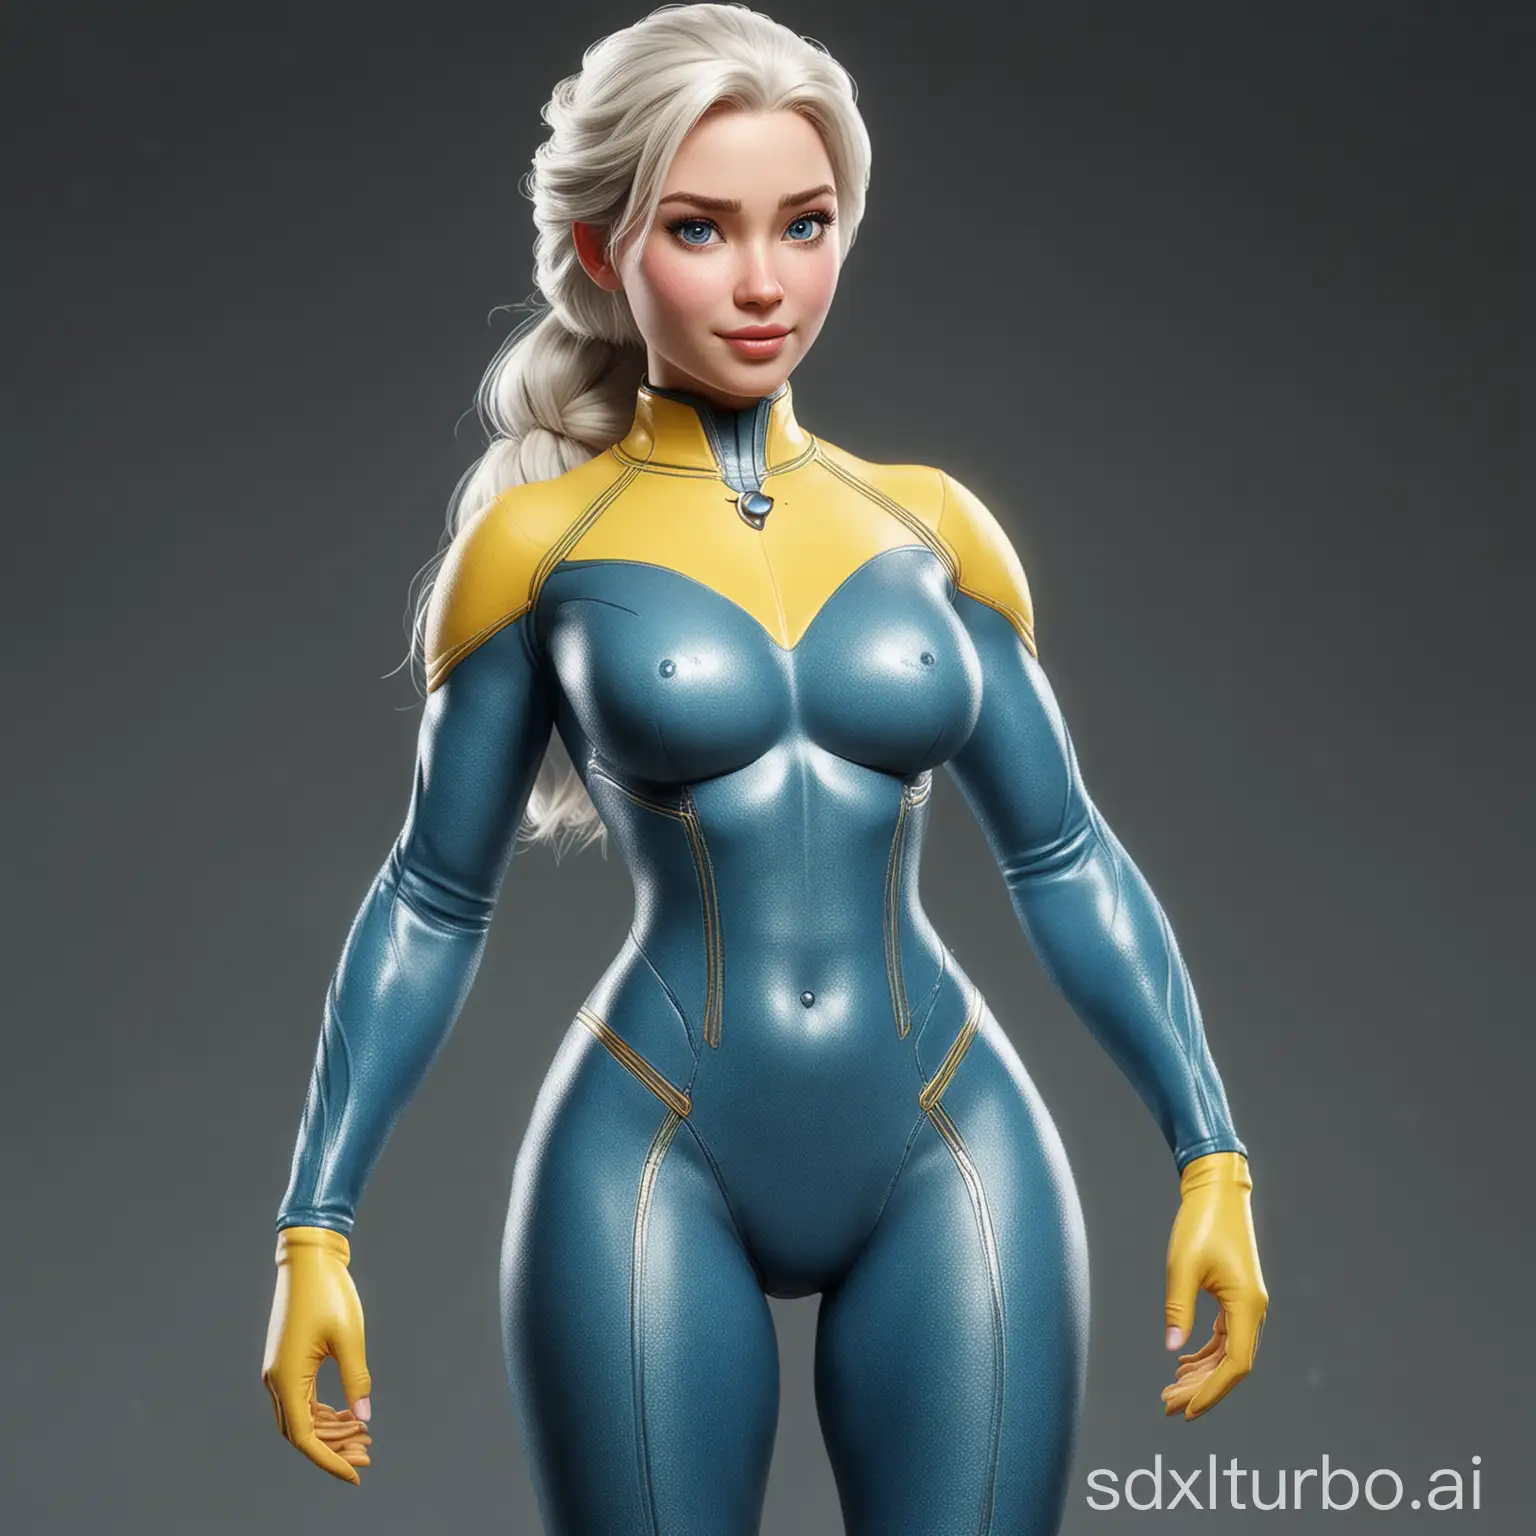 Realistic-Elsa-in-XMen-Tight-Uniform-Sexy-Freckleless-Elsa-with-Thick-Fit-Body